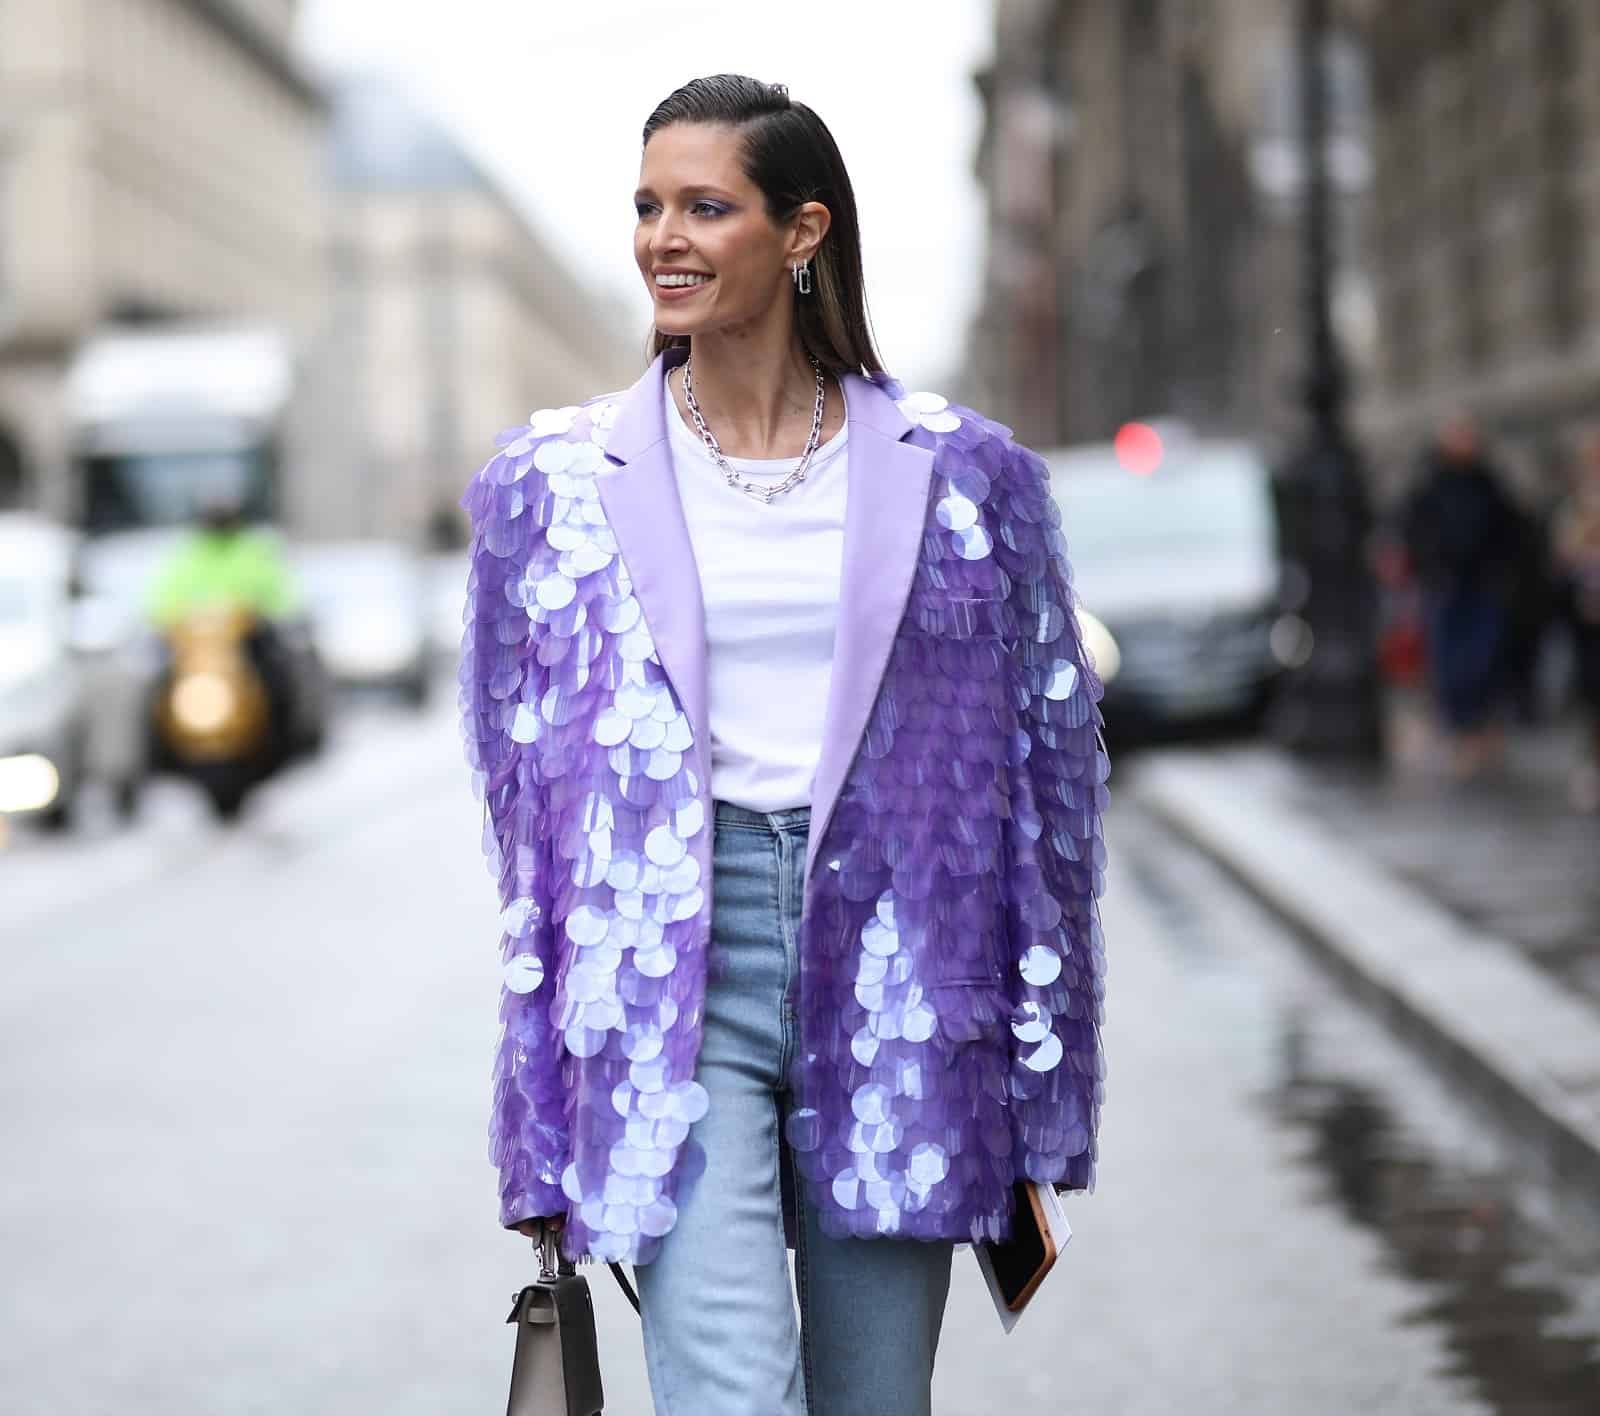 These are the trendiest styles for New Year’s Eve at home. See 12 inspirations from Instagram